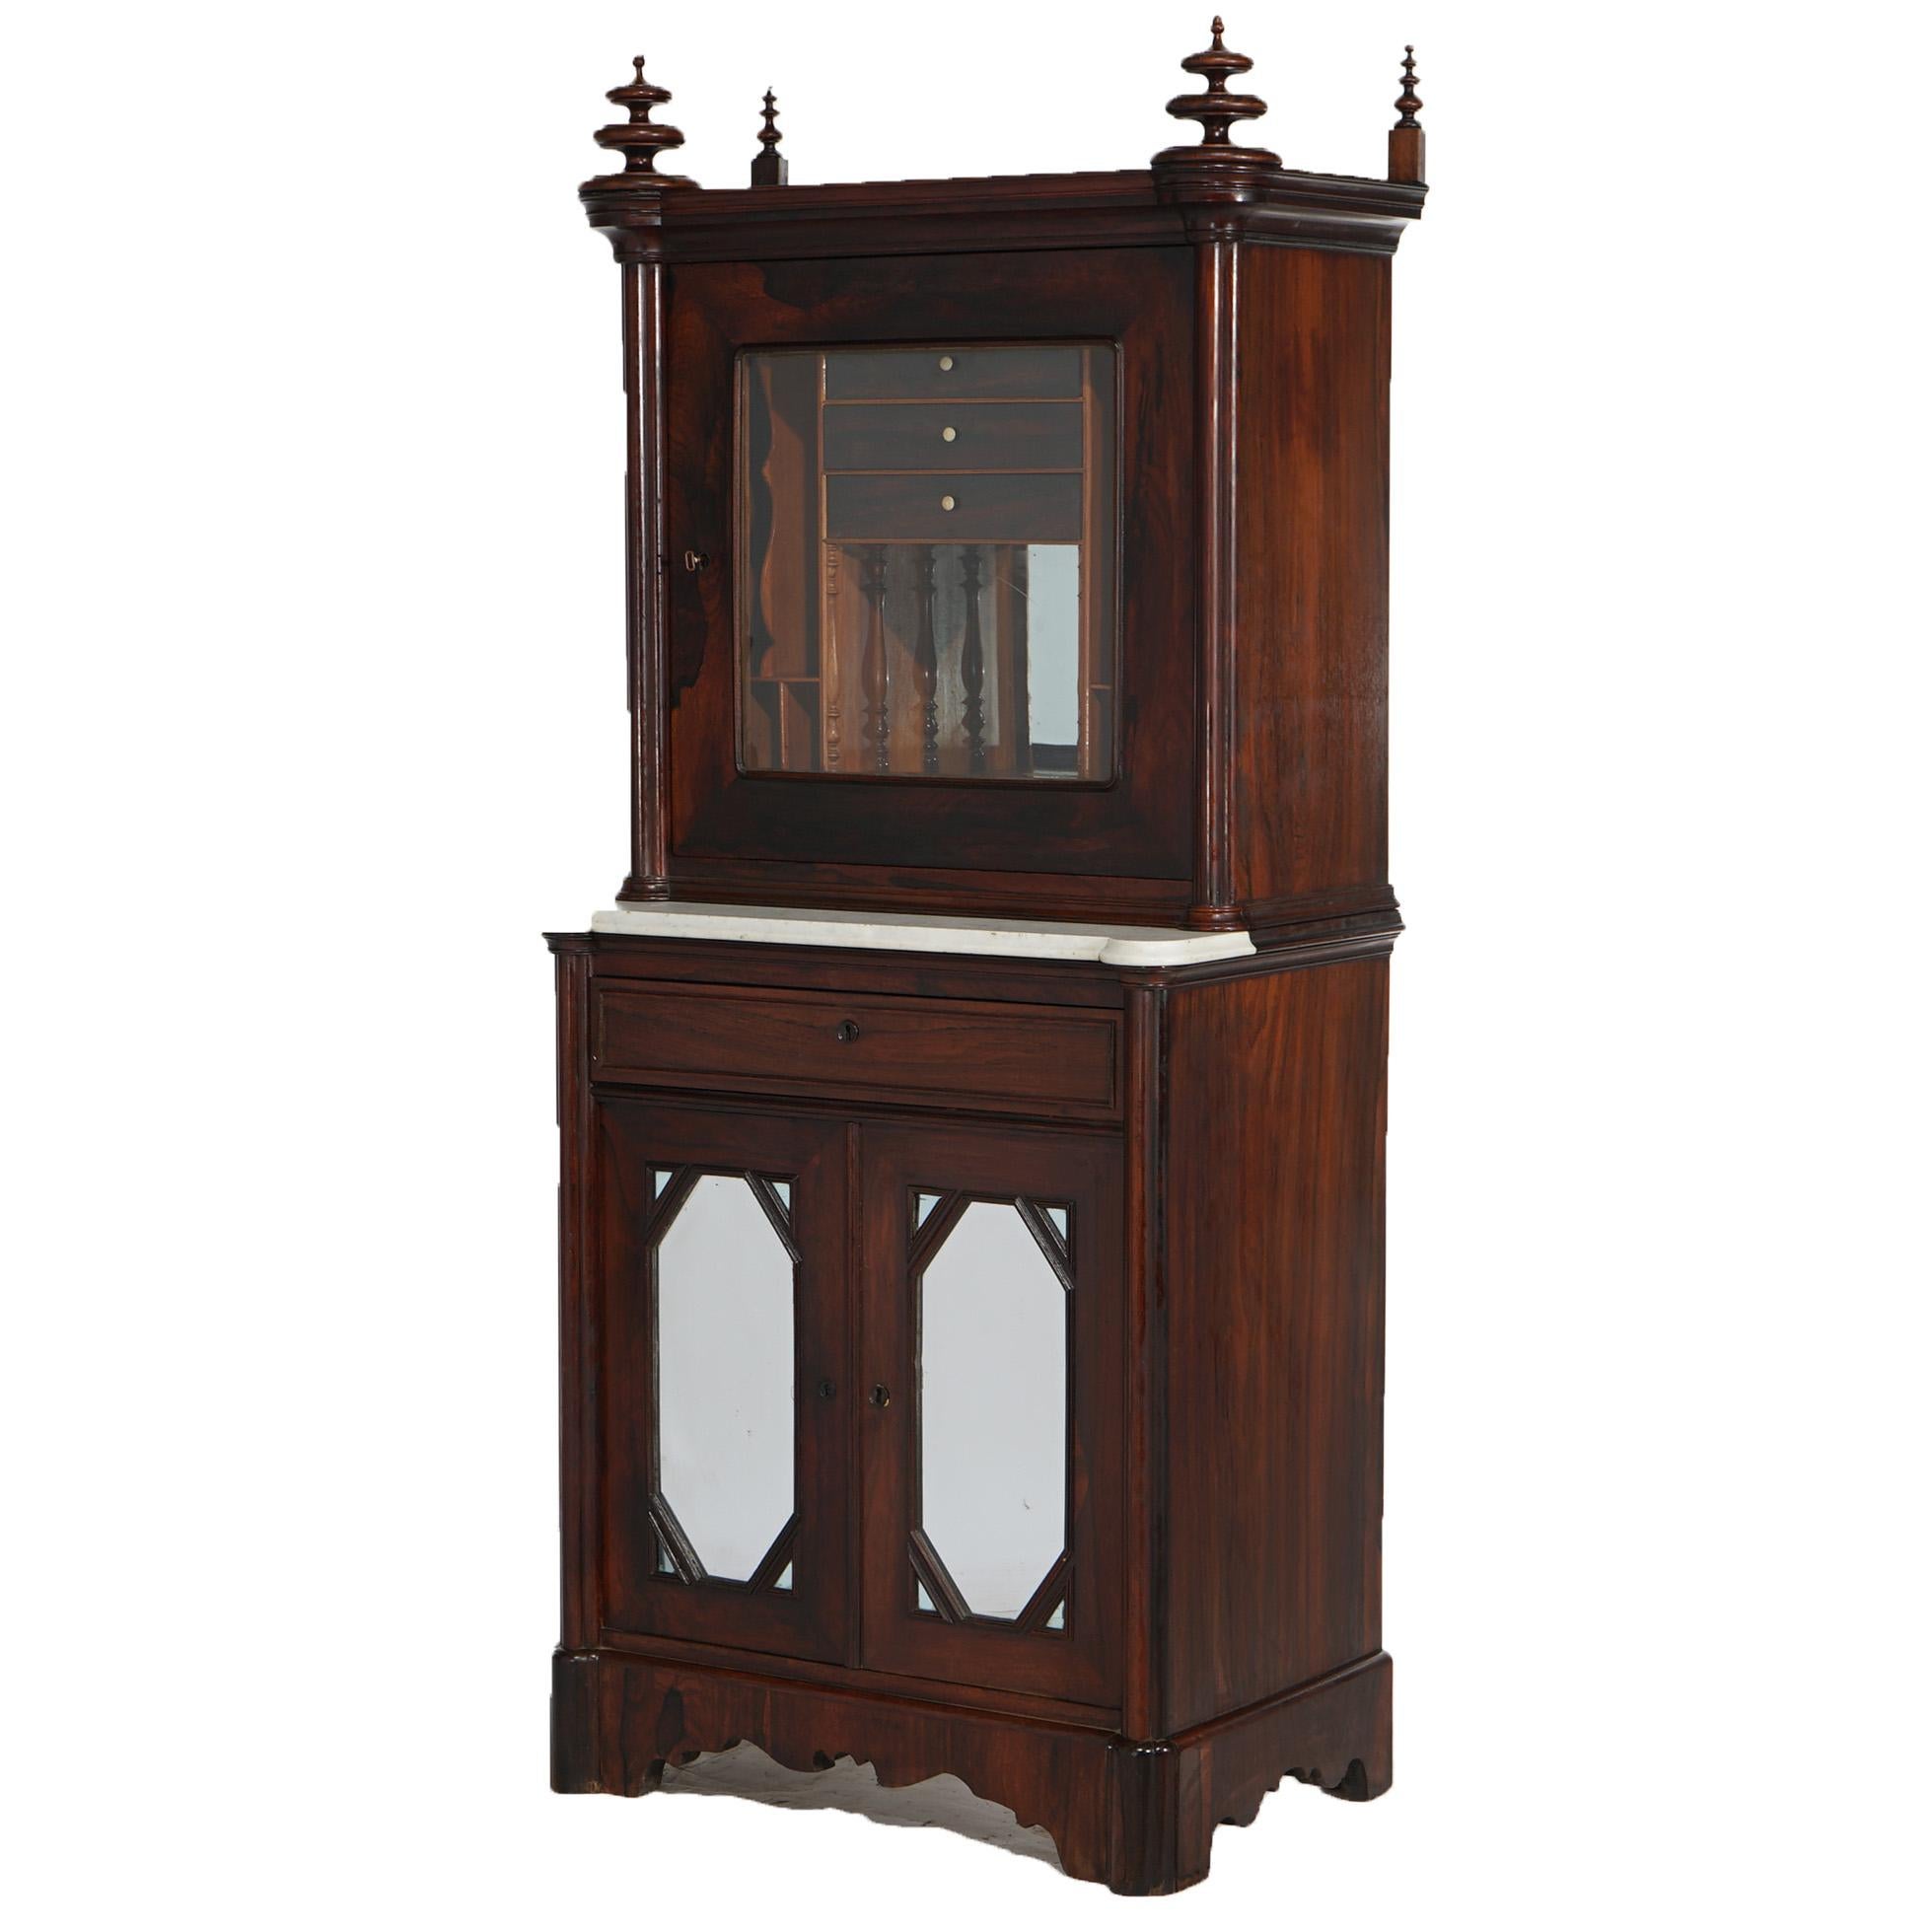 Antique Gothic Revival Victorian Rosewood & Marble Mirrored Secretary Desk C1850 In Good Condition For Sale In Big Flats, NY